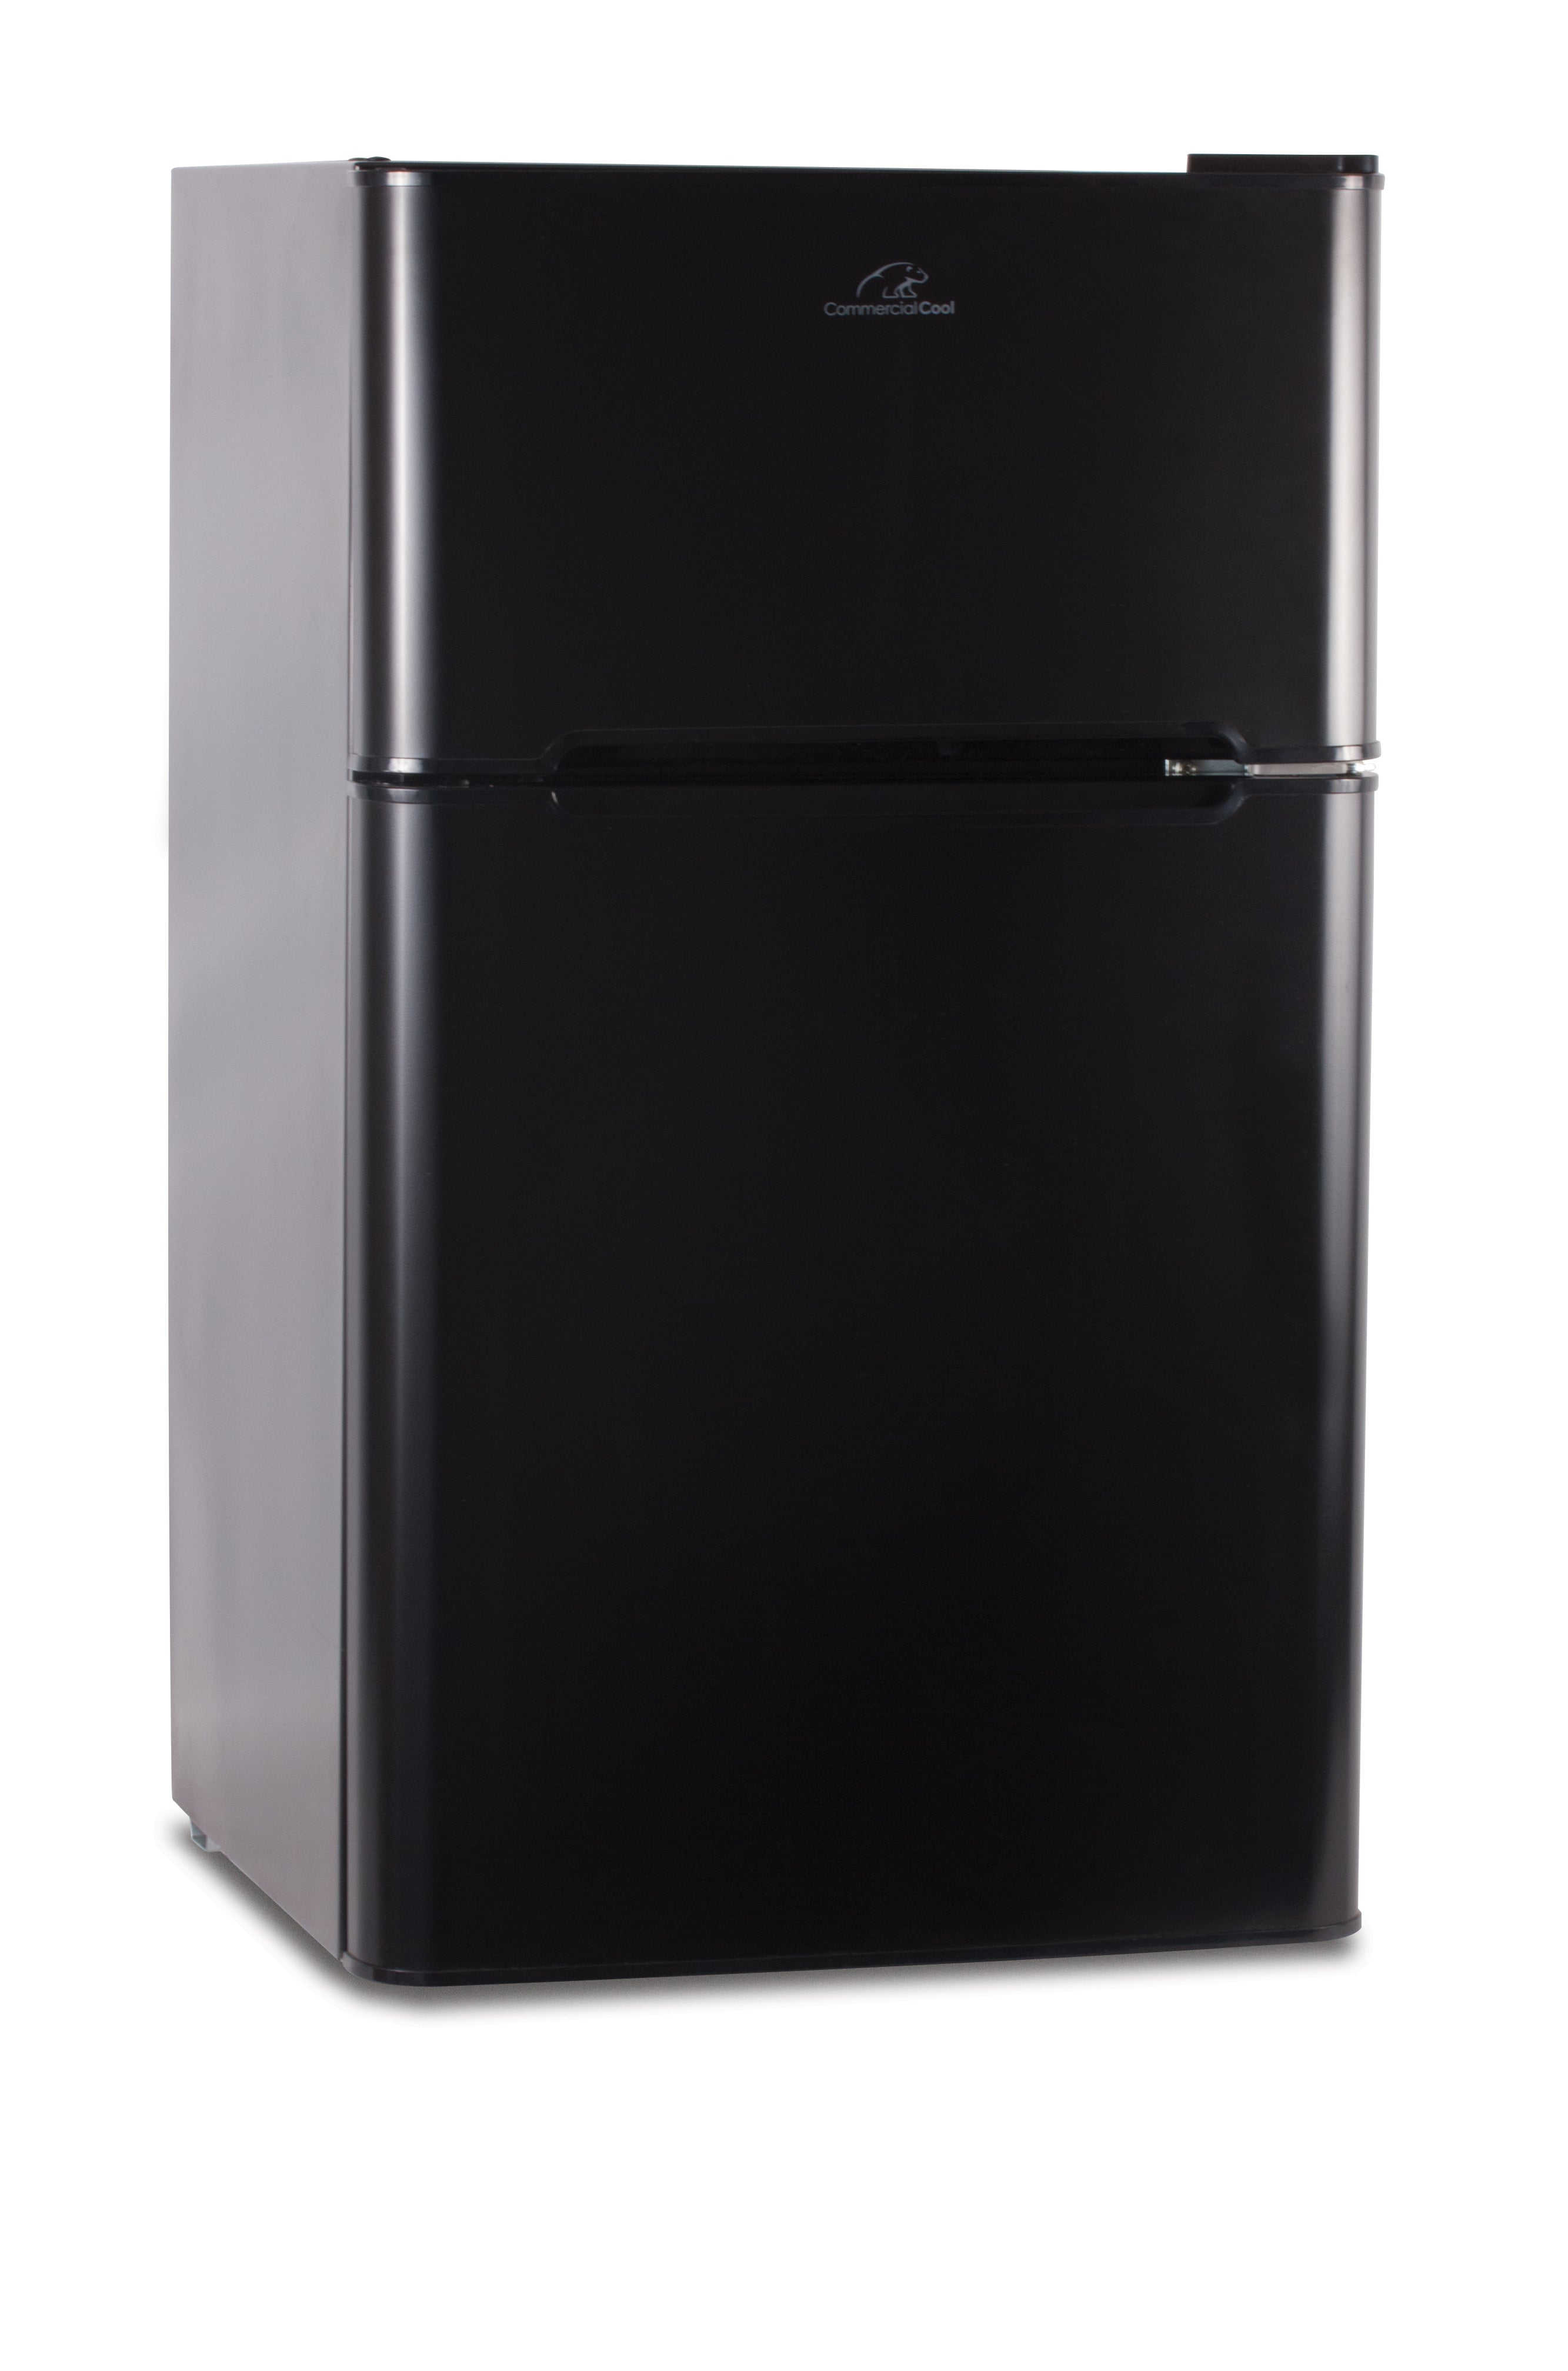 COMMERCIAL COOL Refrigerator and Freezer 3.2 Cu. Ft., Black